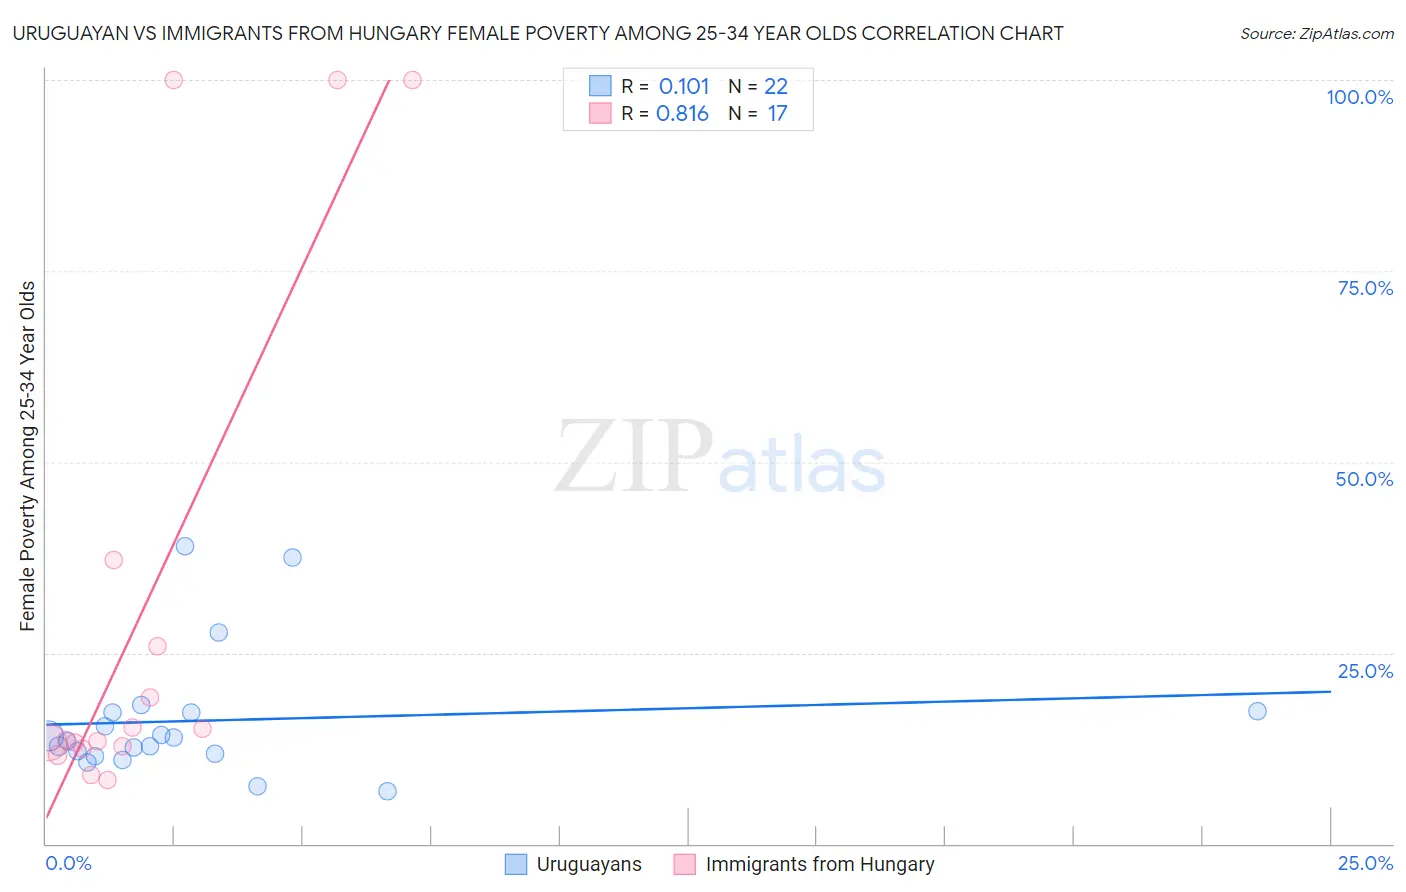 Uruguayan vs Immigrants from Hungary Female Poverty Among 25-34 Year Olds